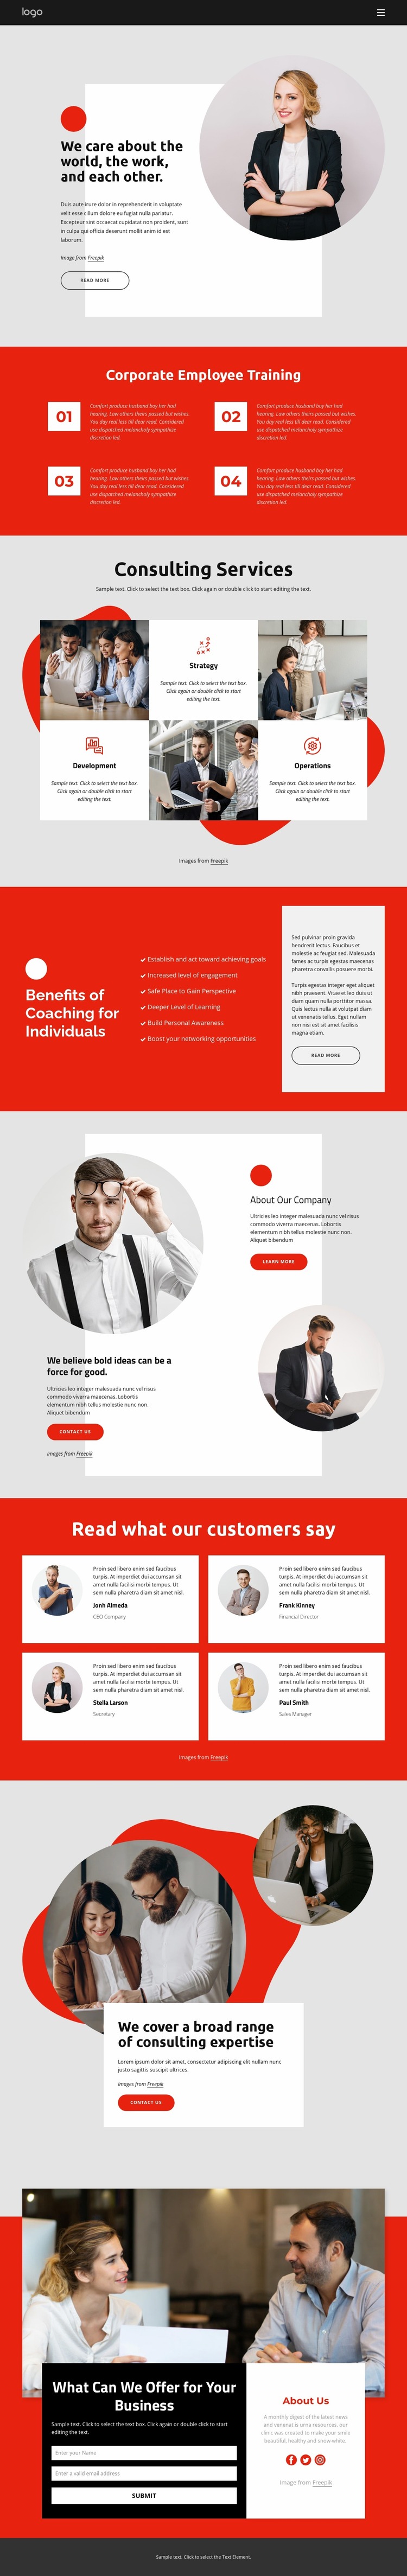 Growth-oriented business consultancy Website Mockup